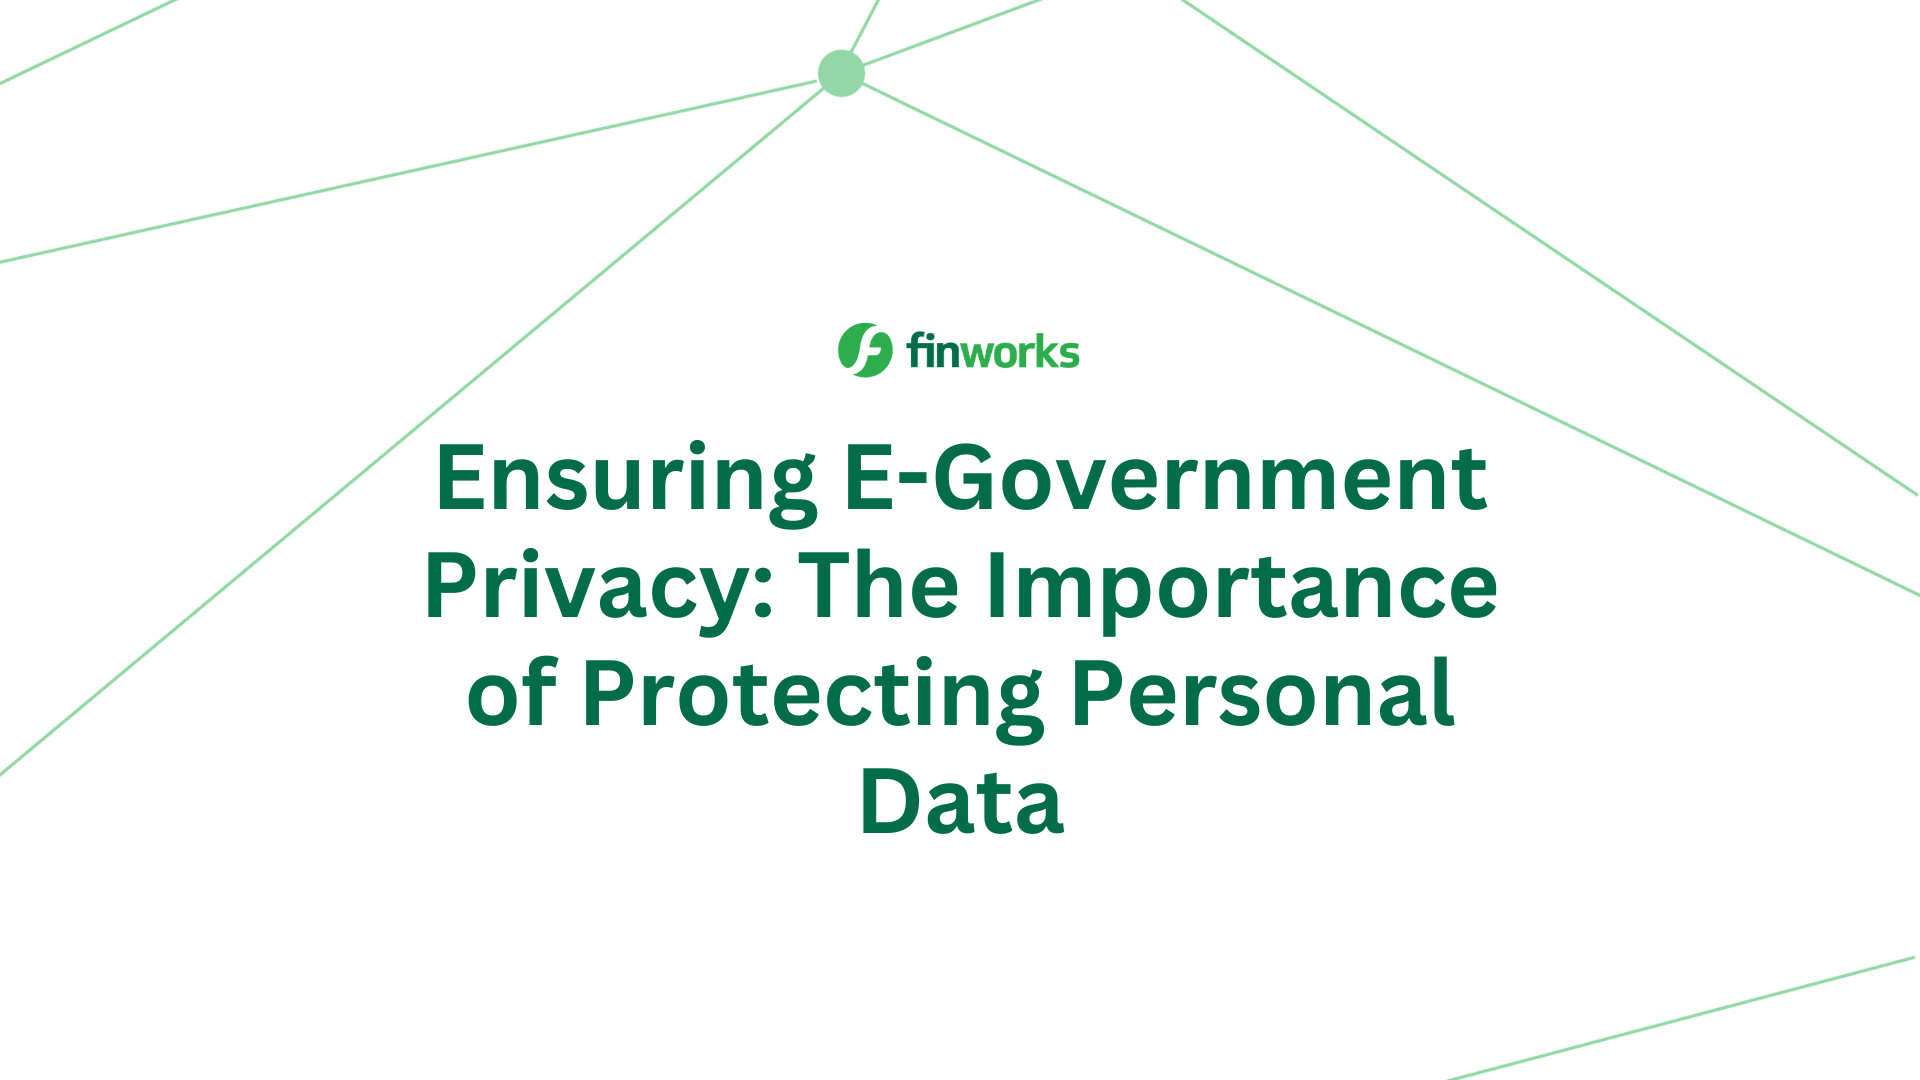 Ensuring E-Government Privacy: The Importance of Protecting Personal Data